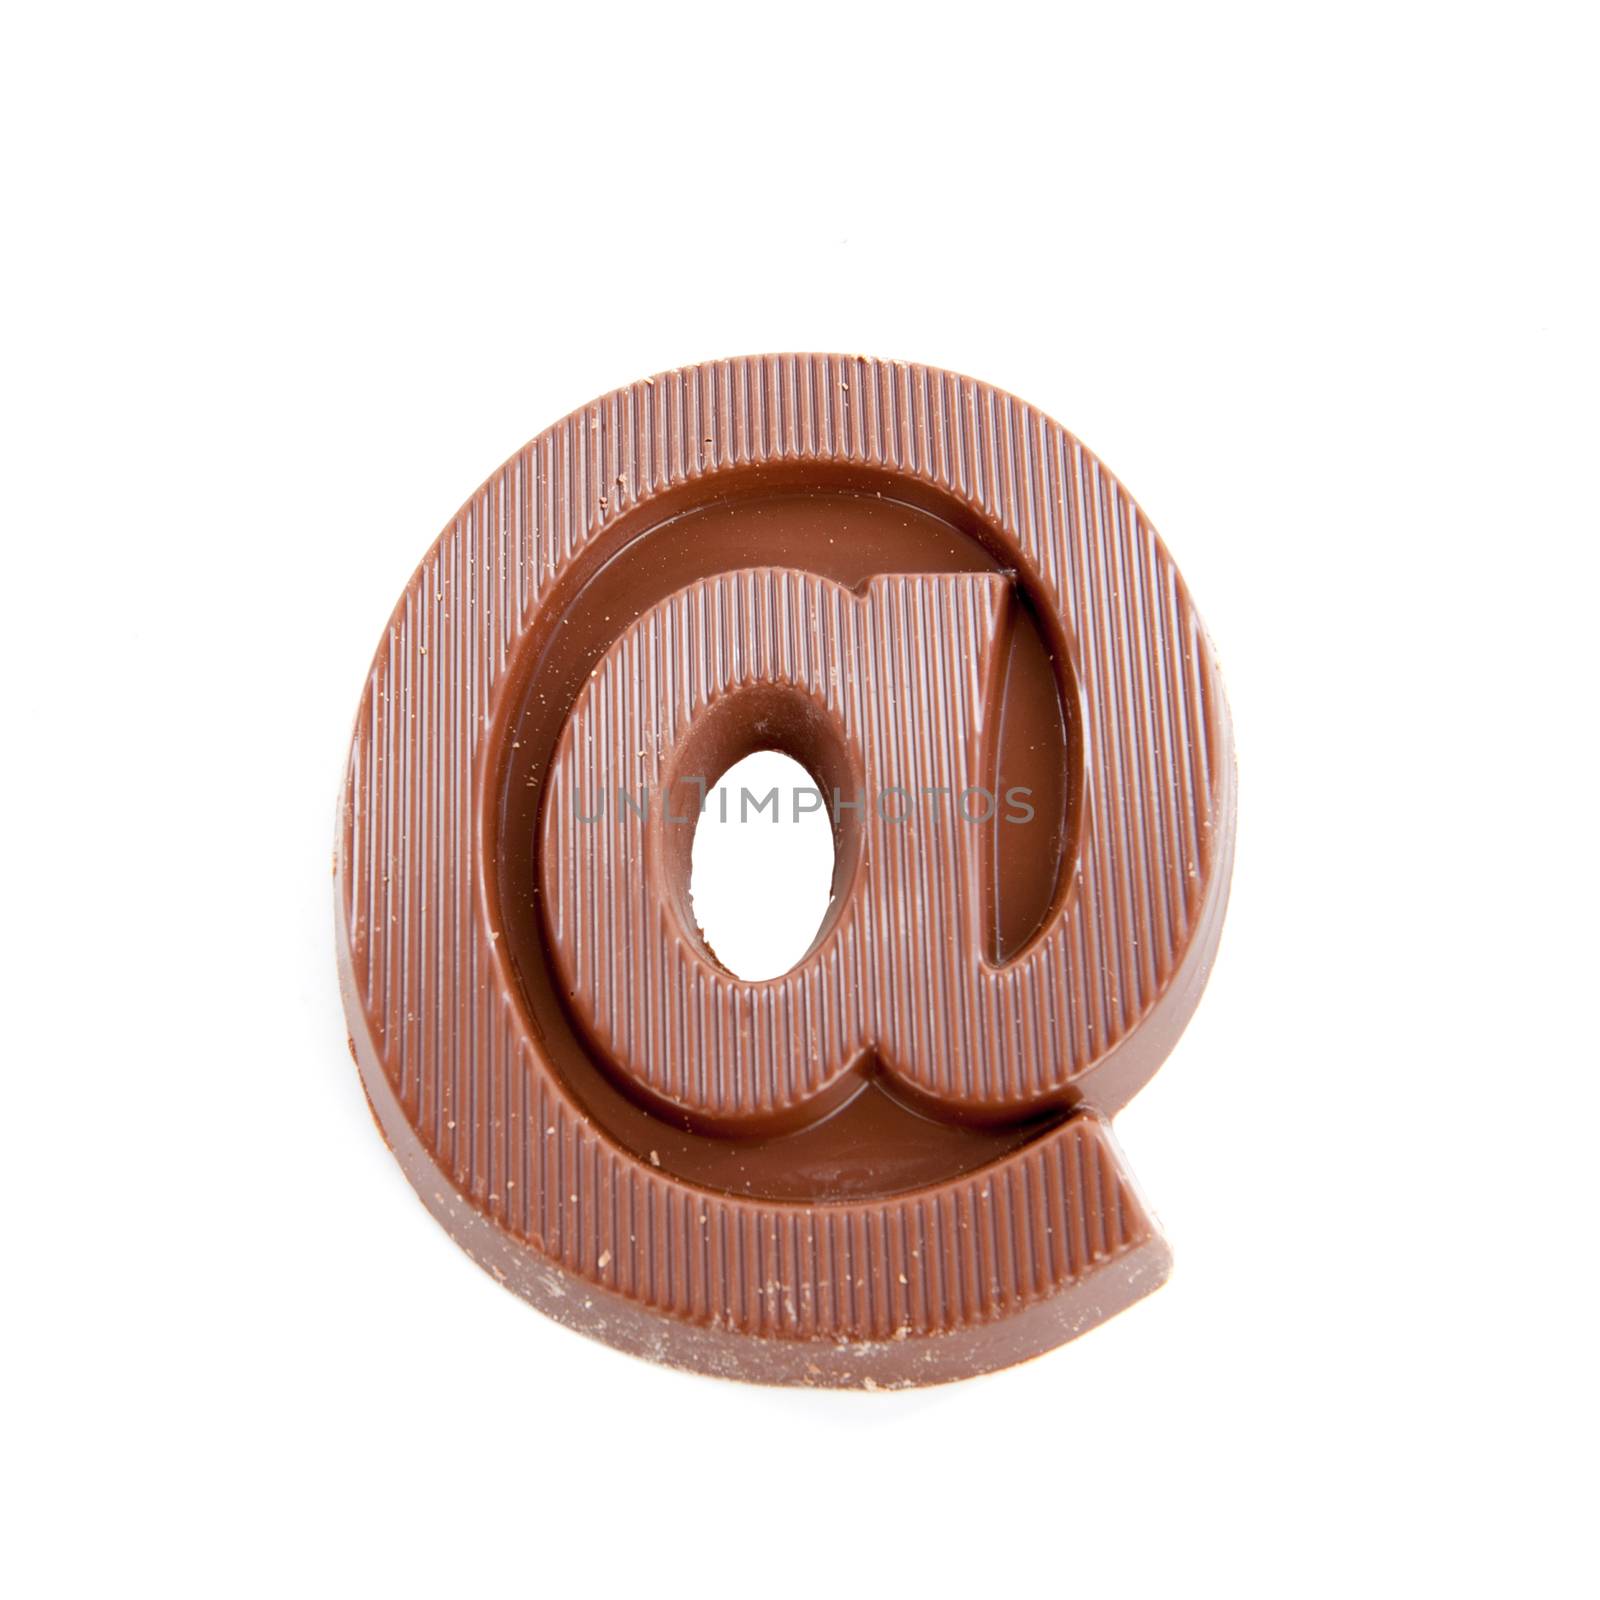 a atpersand, made of chocolate on a white background